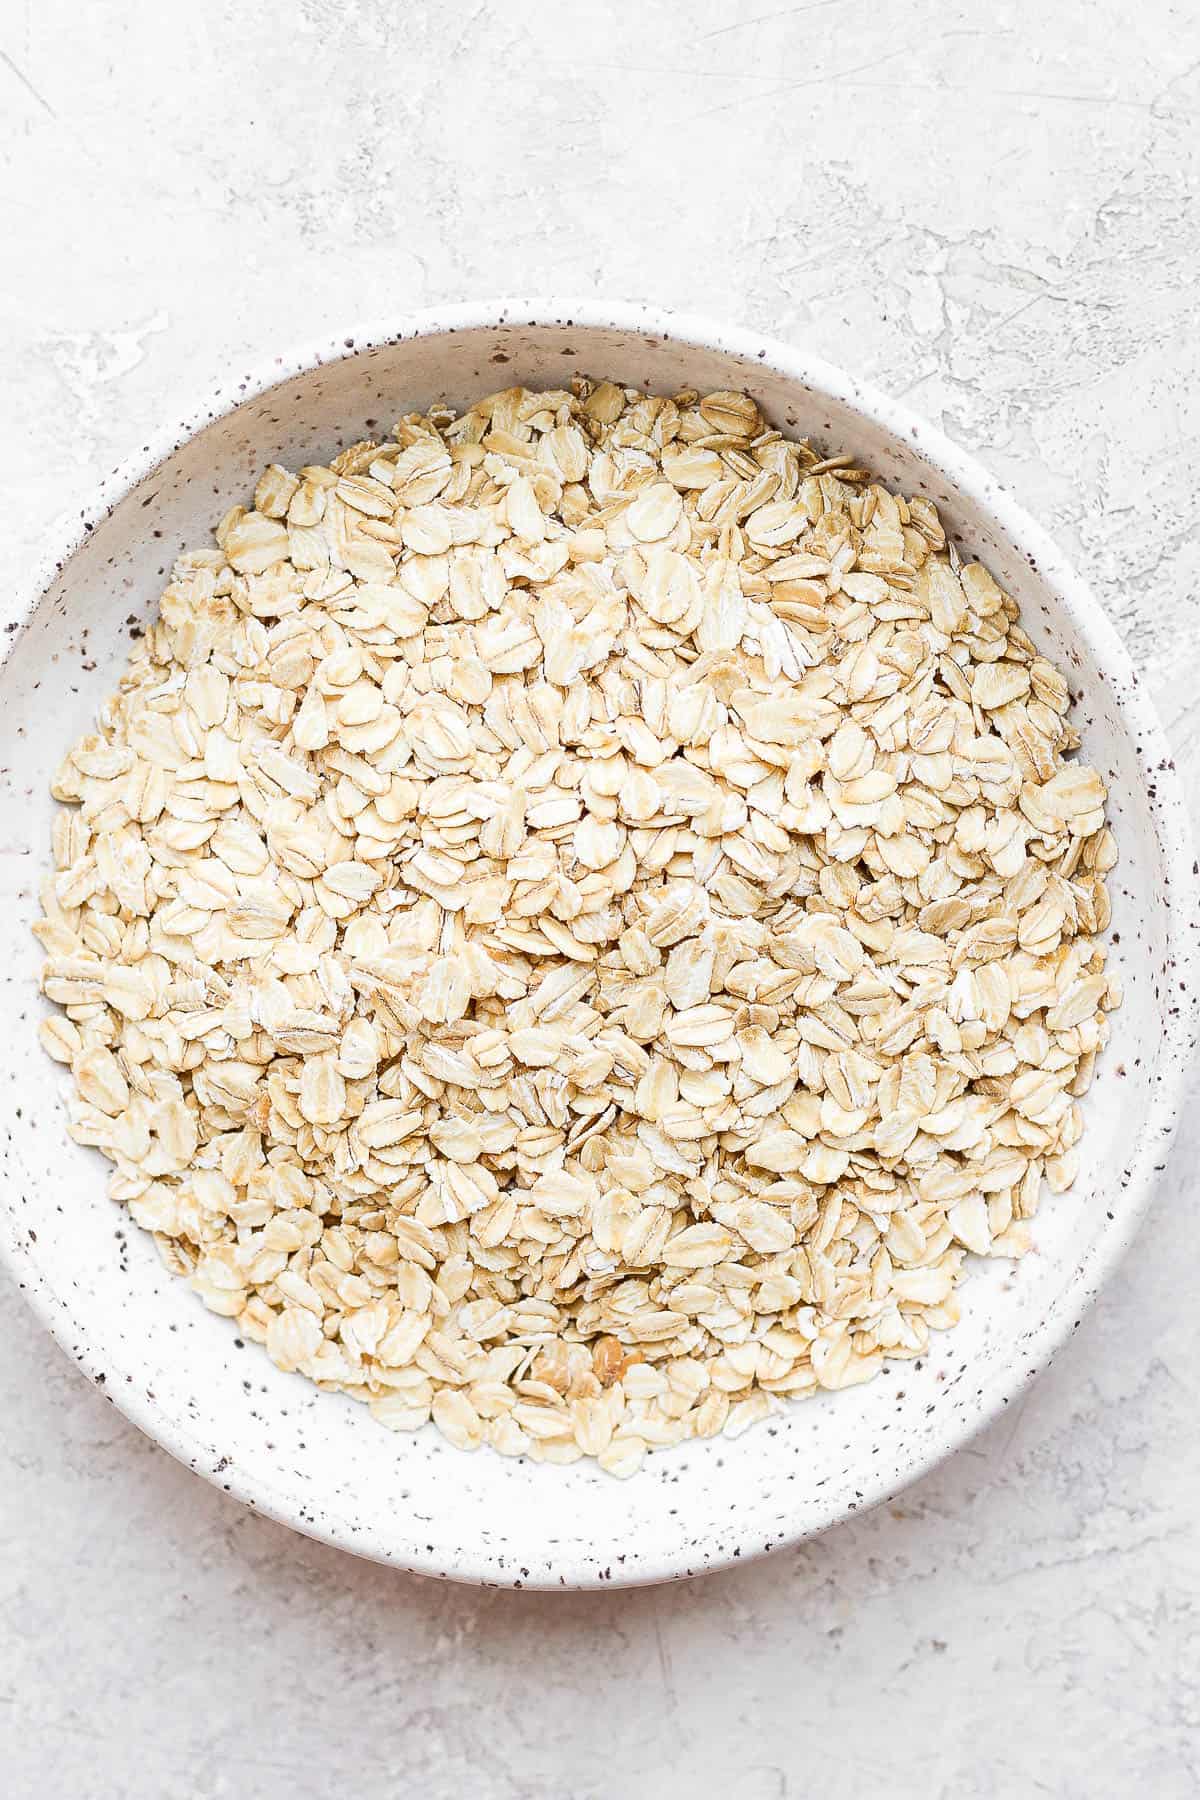 Rolled oats in a bowl.